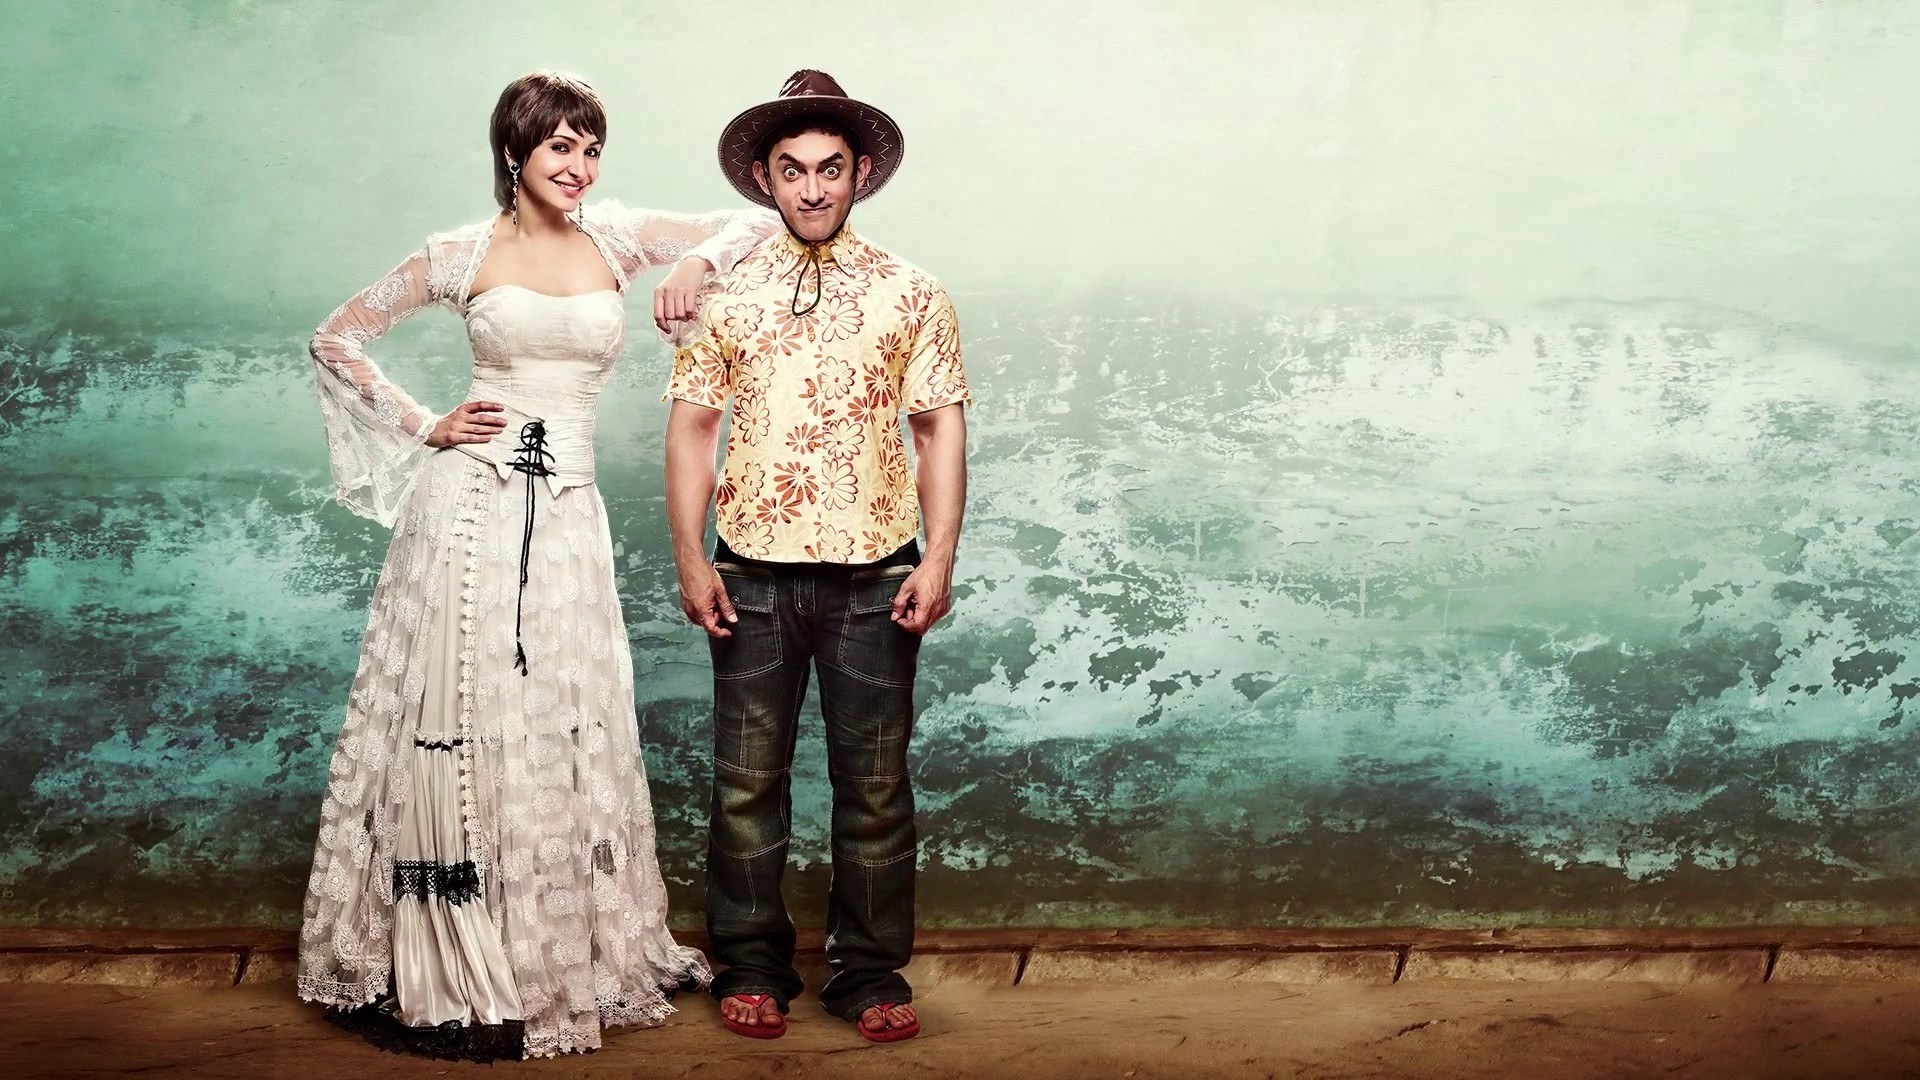 PK (Movie): Received 8 nominations at the 60th Filmfare Awards, winning two. 1920x1080 Full HD Wallpaper.